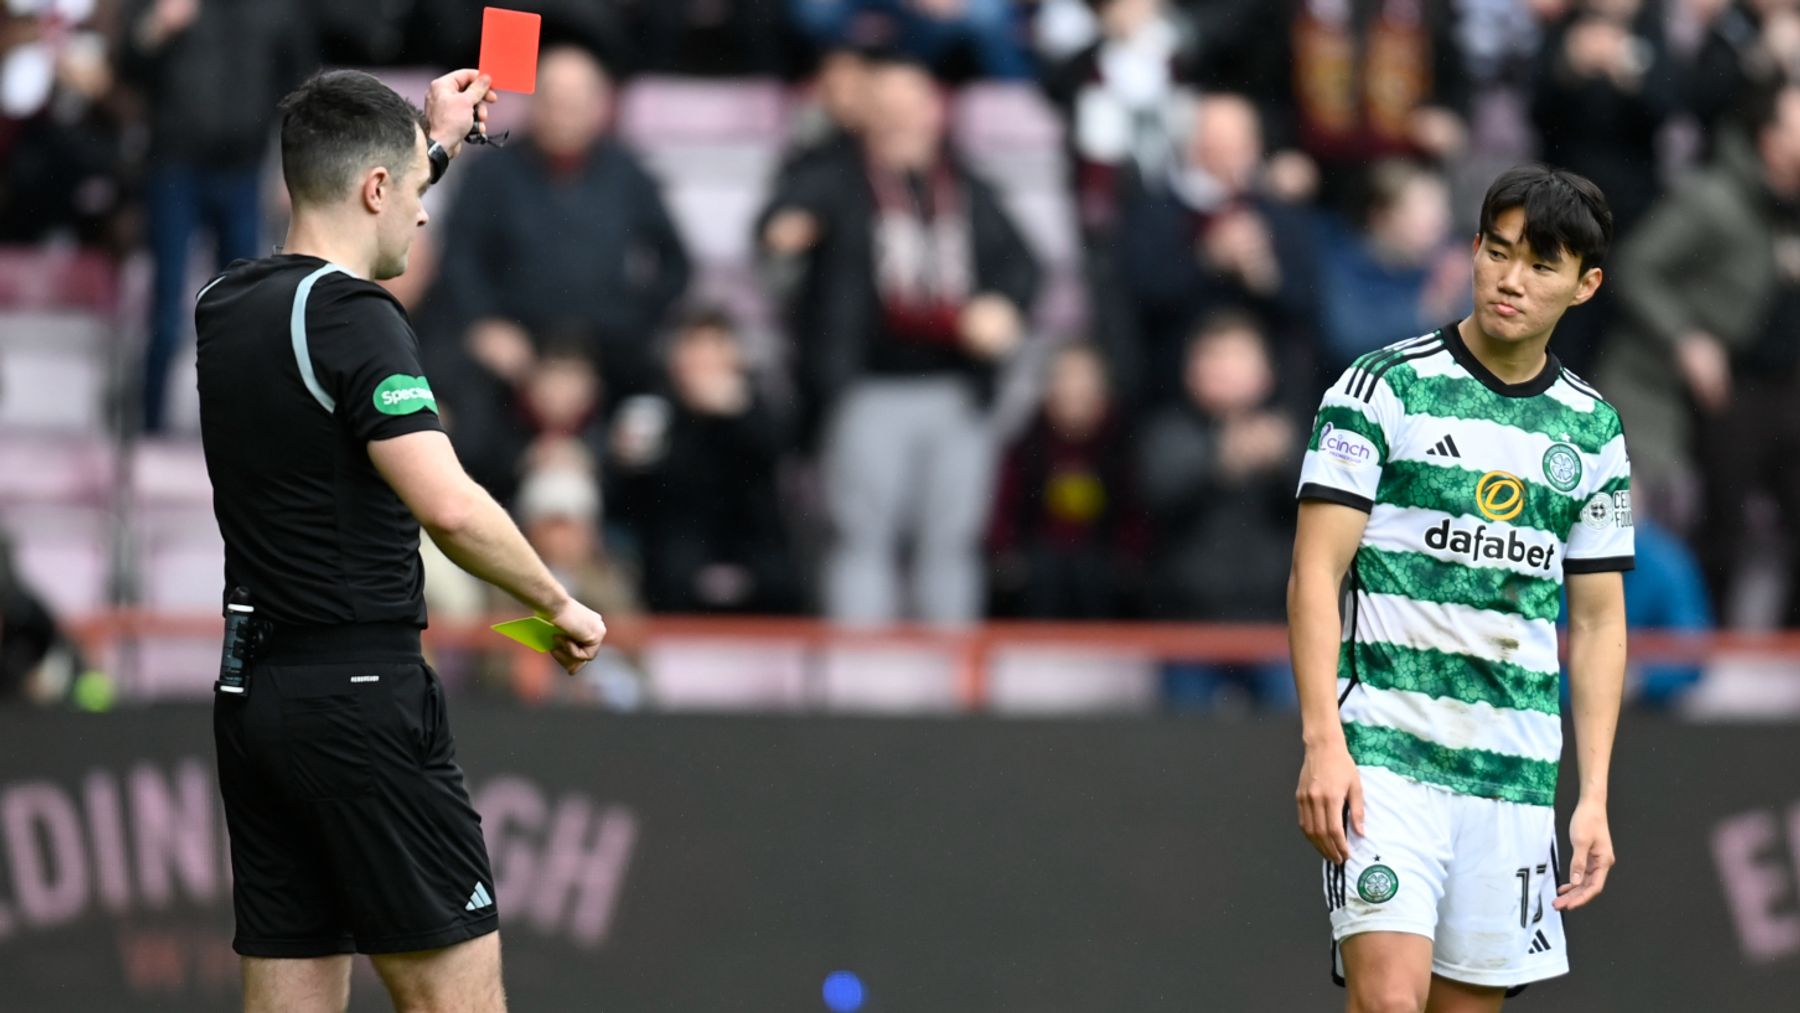 Celtic to appeal red card issued to Hyunjun Yang